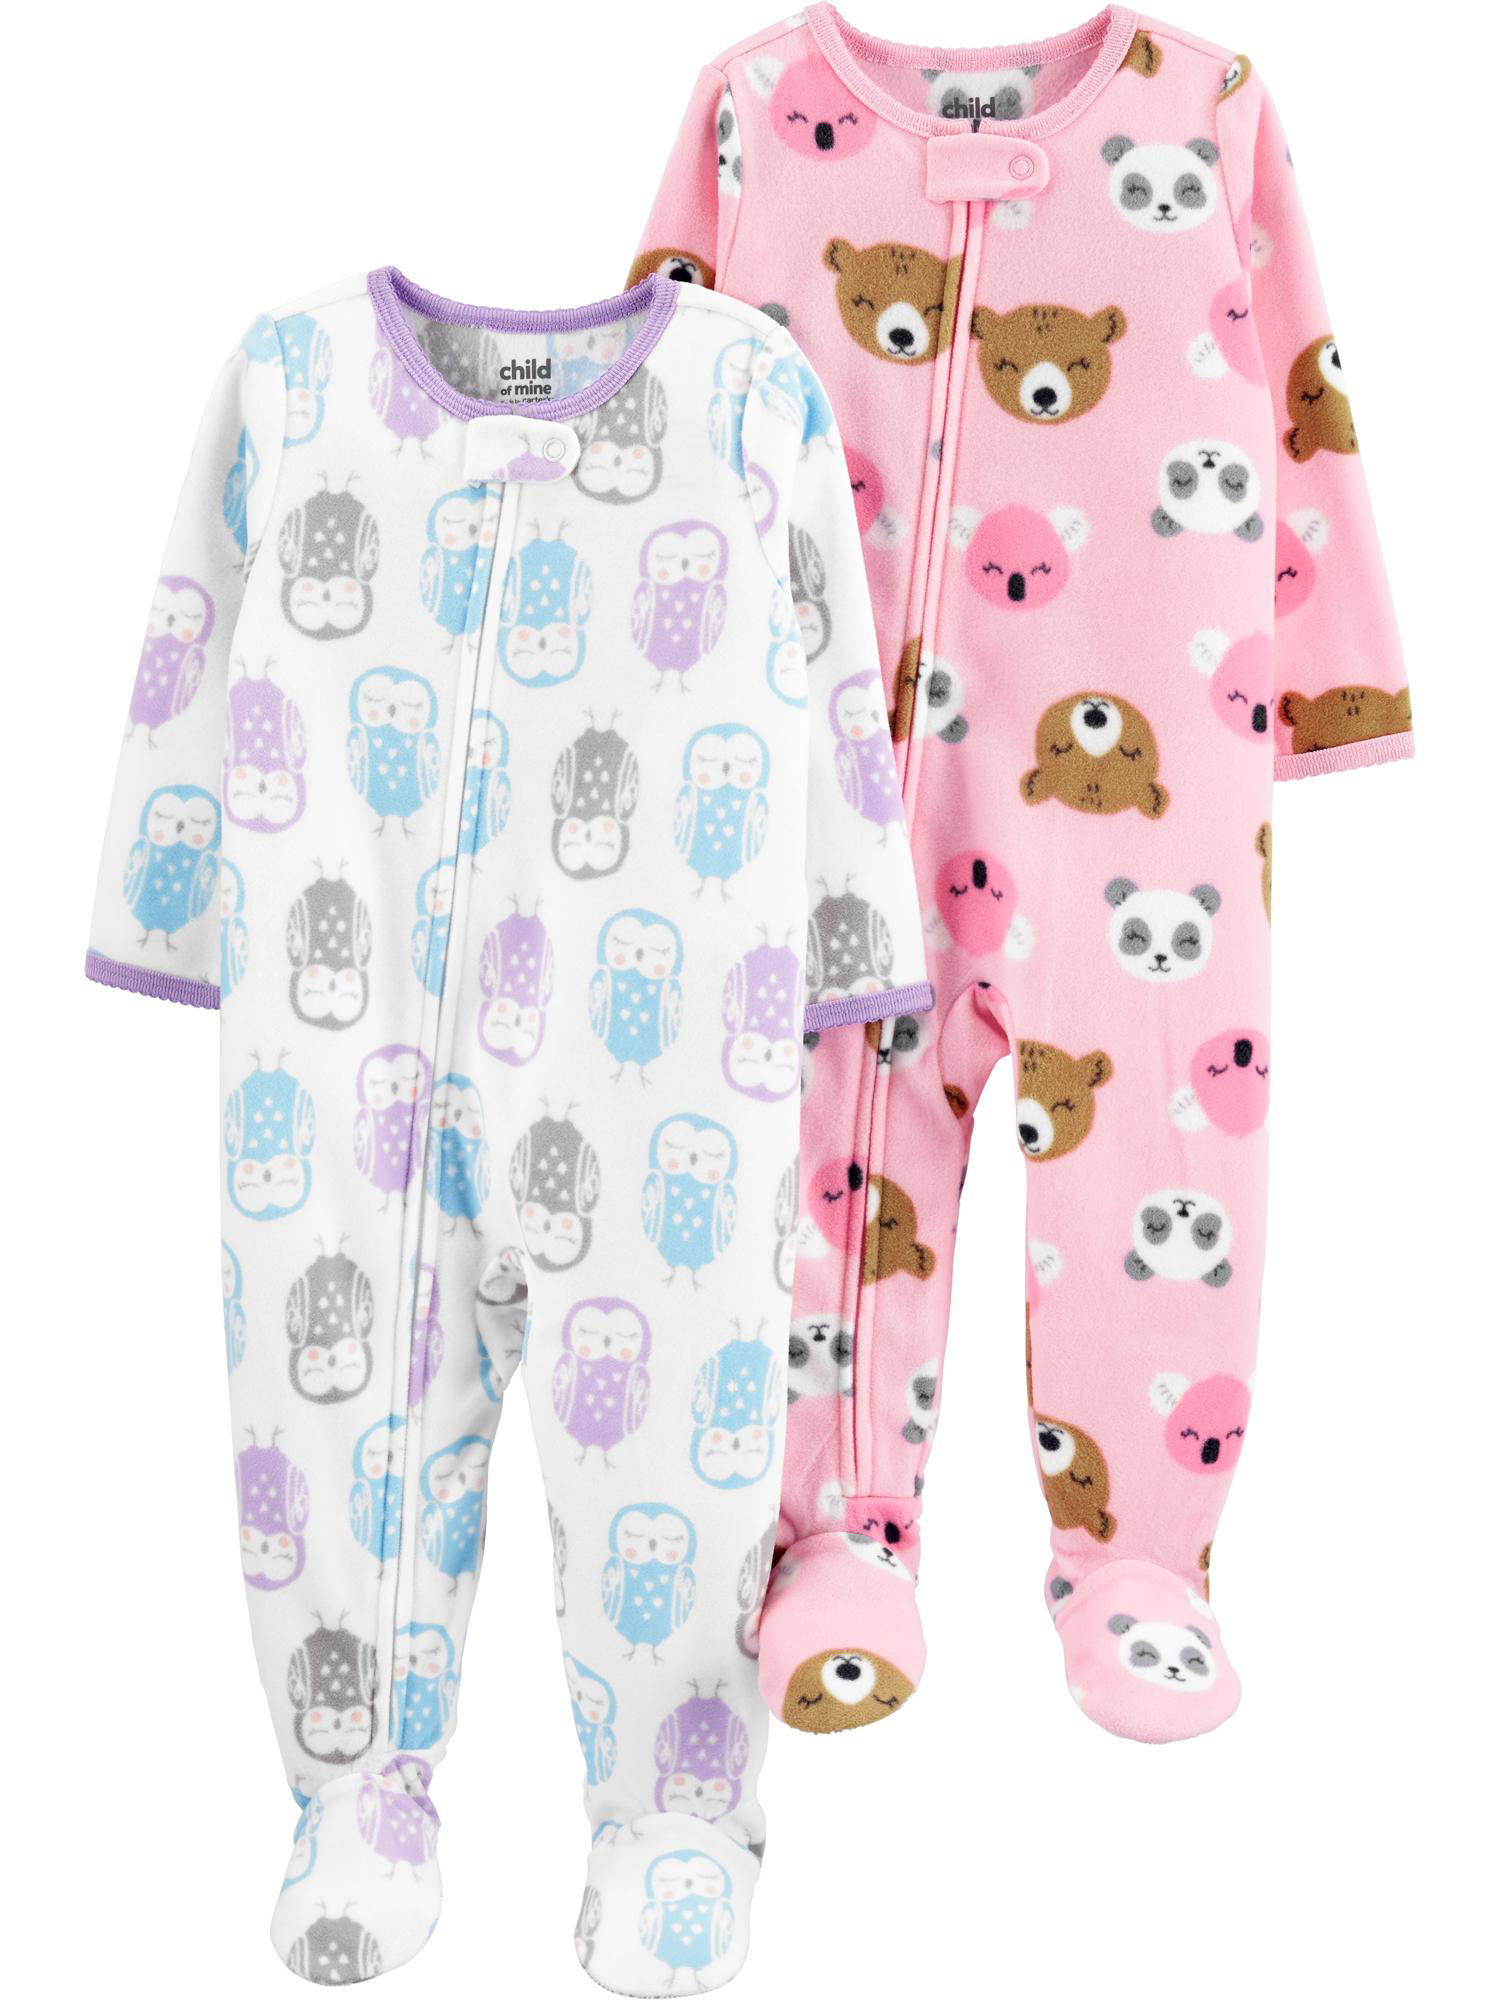 Carter's Child of Mine Long Sleeve Footed Pajamas Bundle, 2 pack (Baby Girls, Toddler Girls) - image 1 of 2